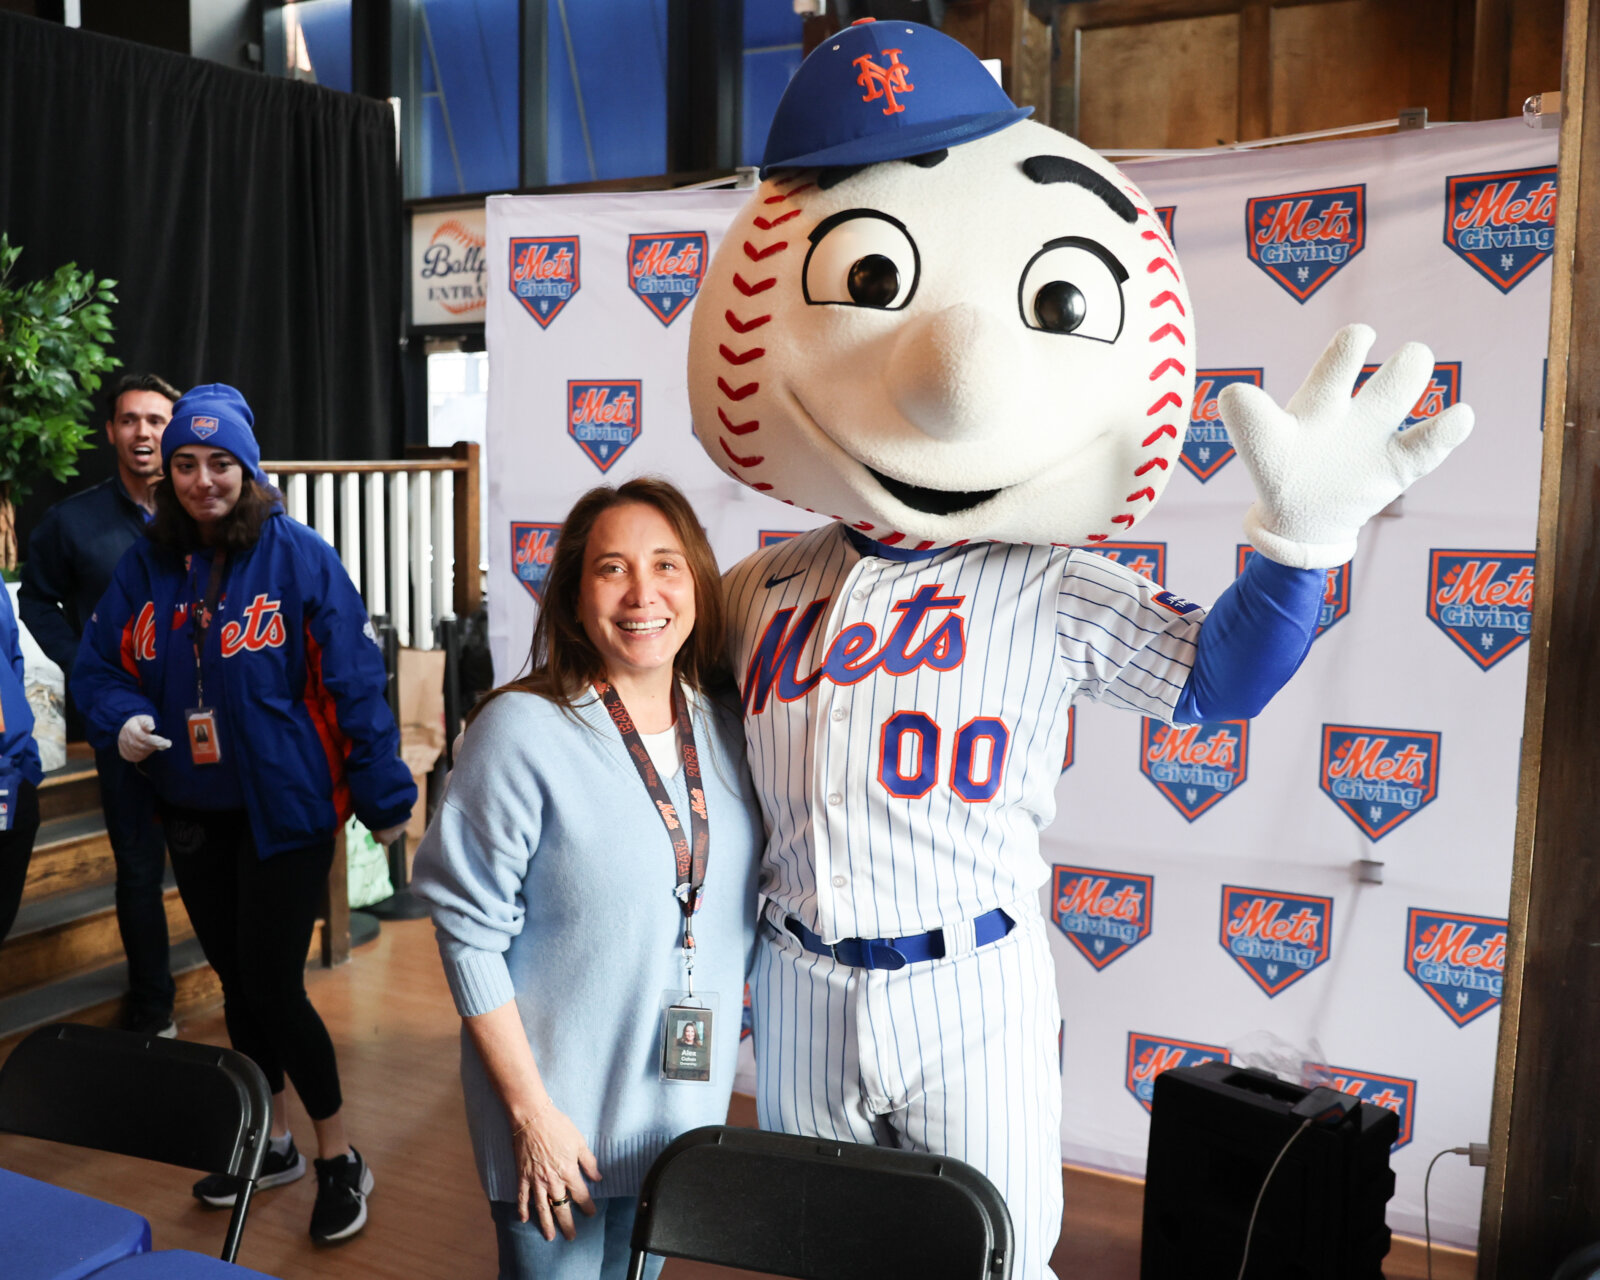 Mets hold annual coat drive as part of ‘MetsGiving’ initiative